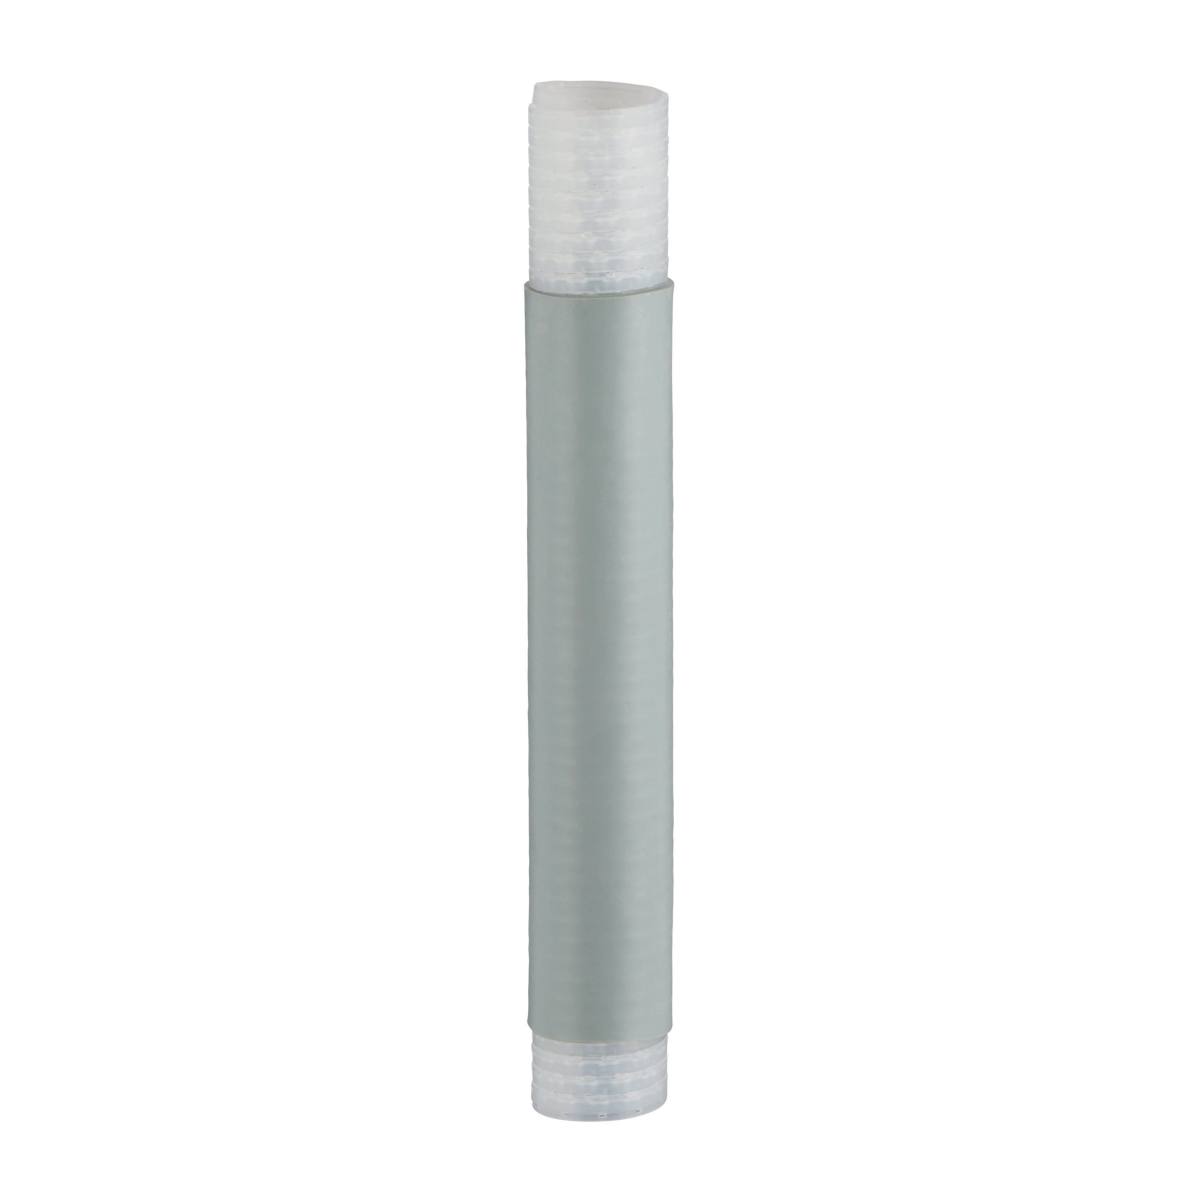 3M 8447.32 Cold-shrink tubing, silicone, light gray, 24.2/14.1 mm, 76 mm